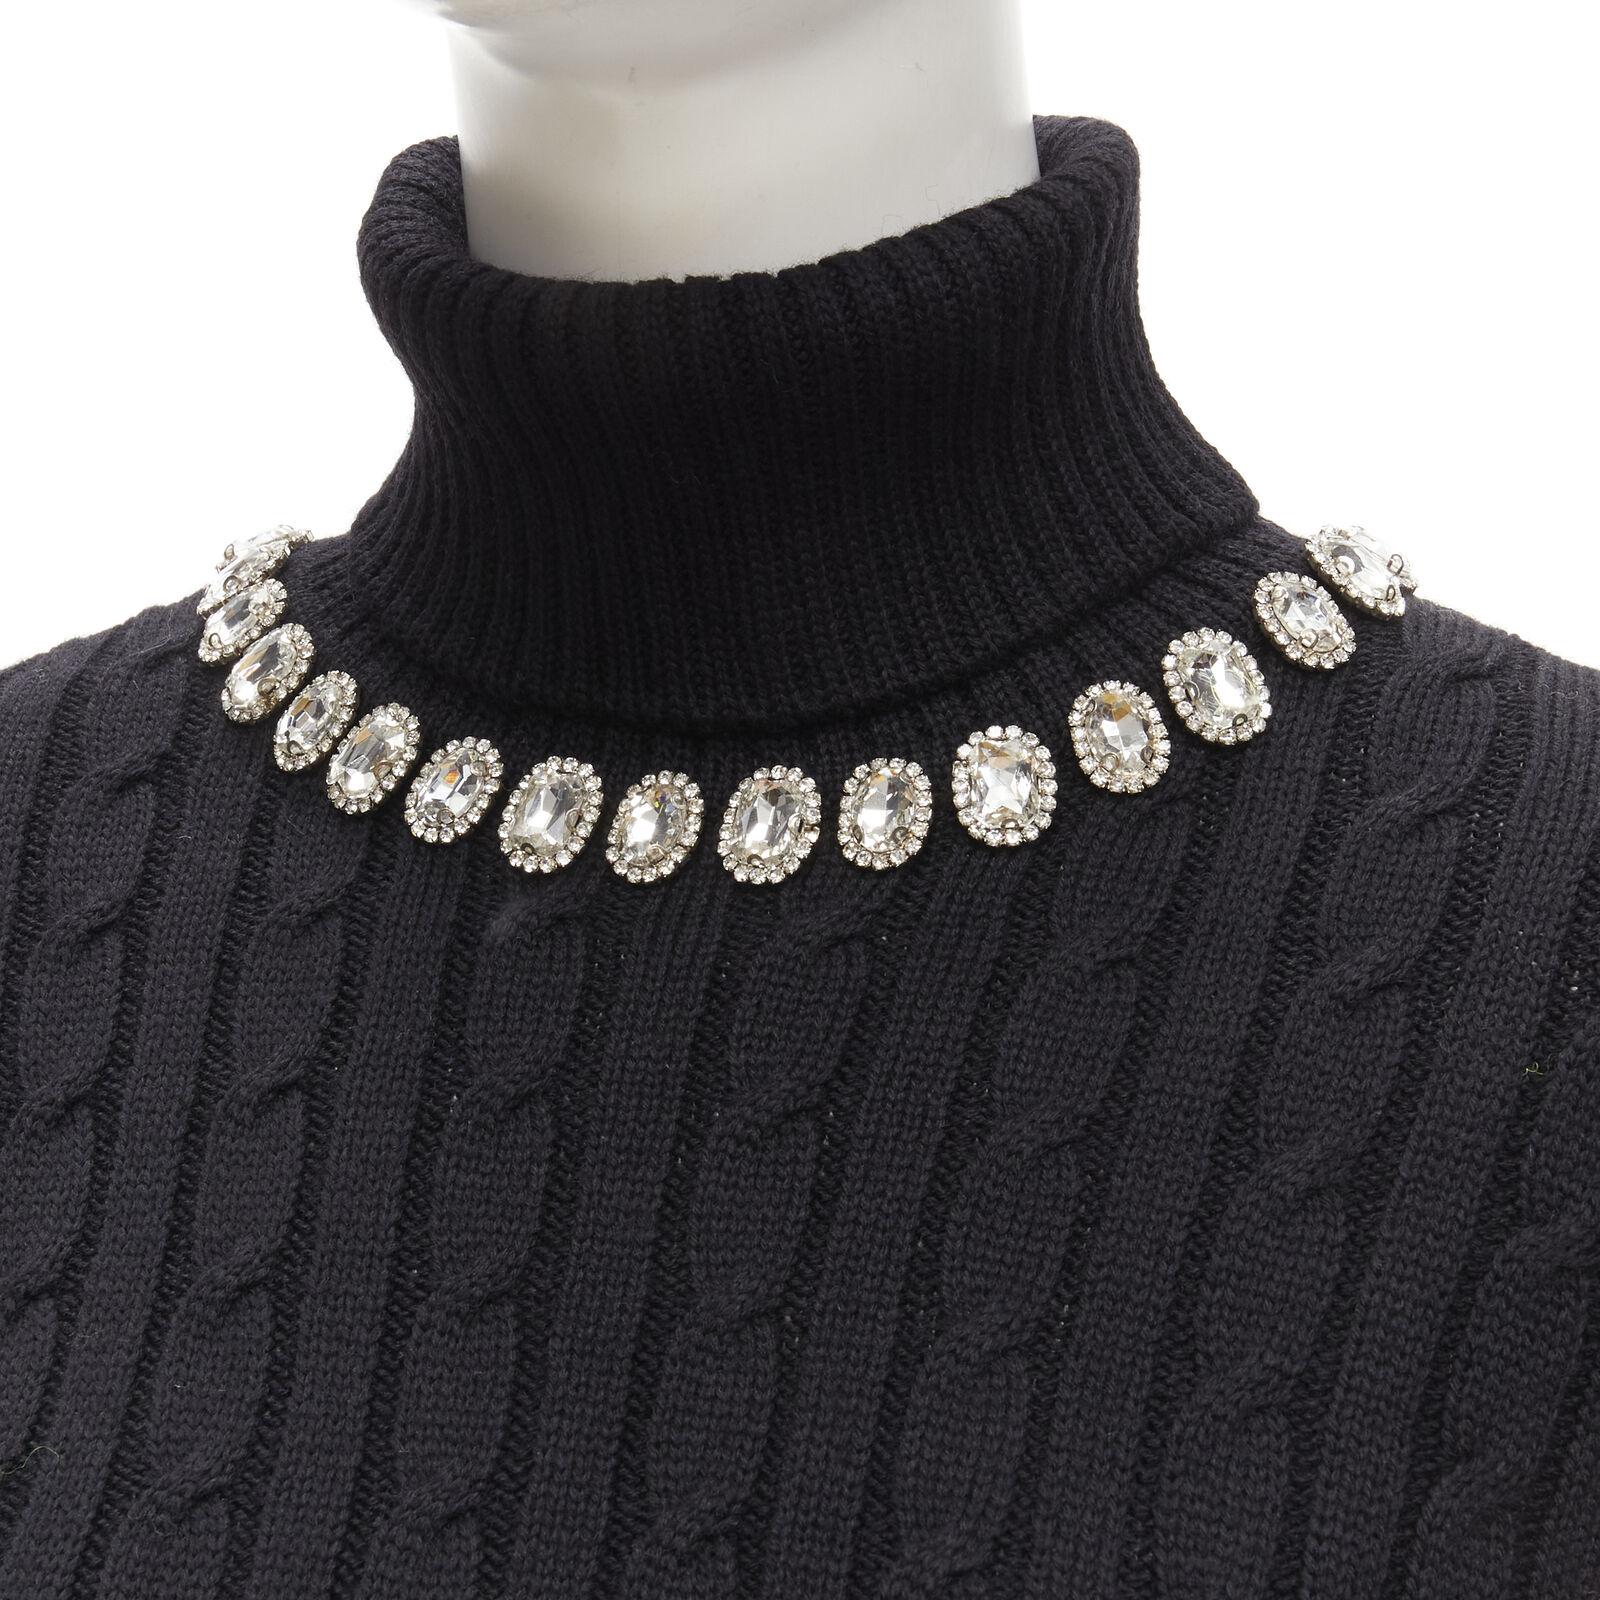 GIUSEPPE DI MORABITO black wool crystal embellished cable knit turtleneck IT38 For Sale 2